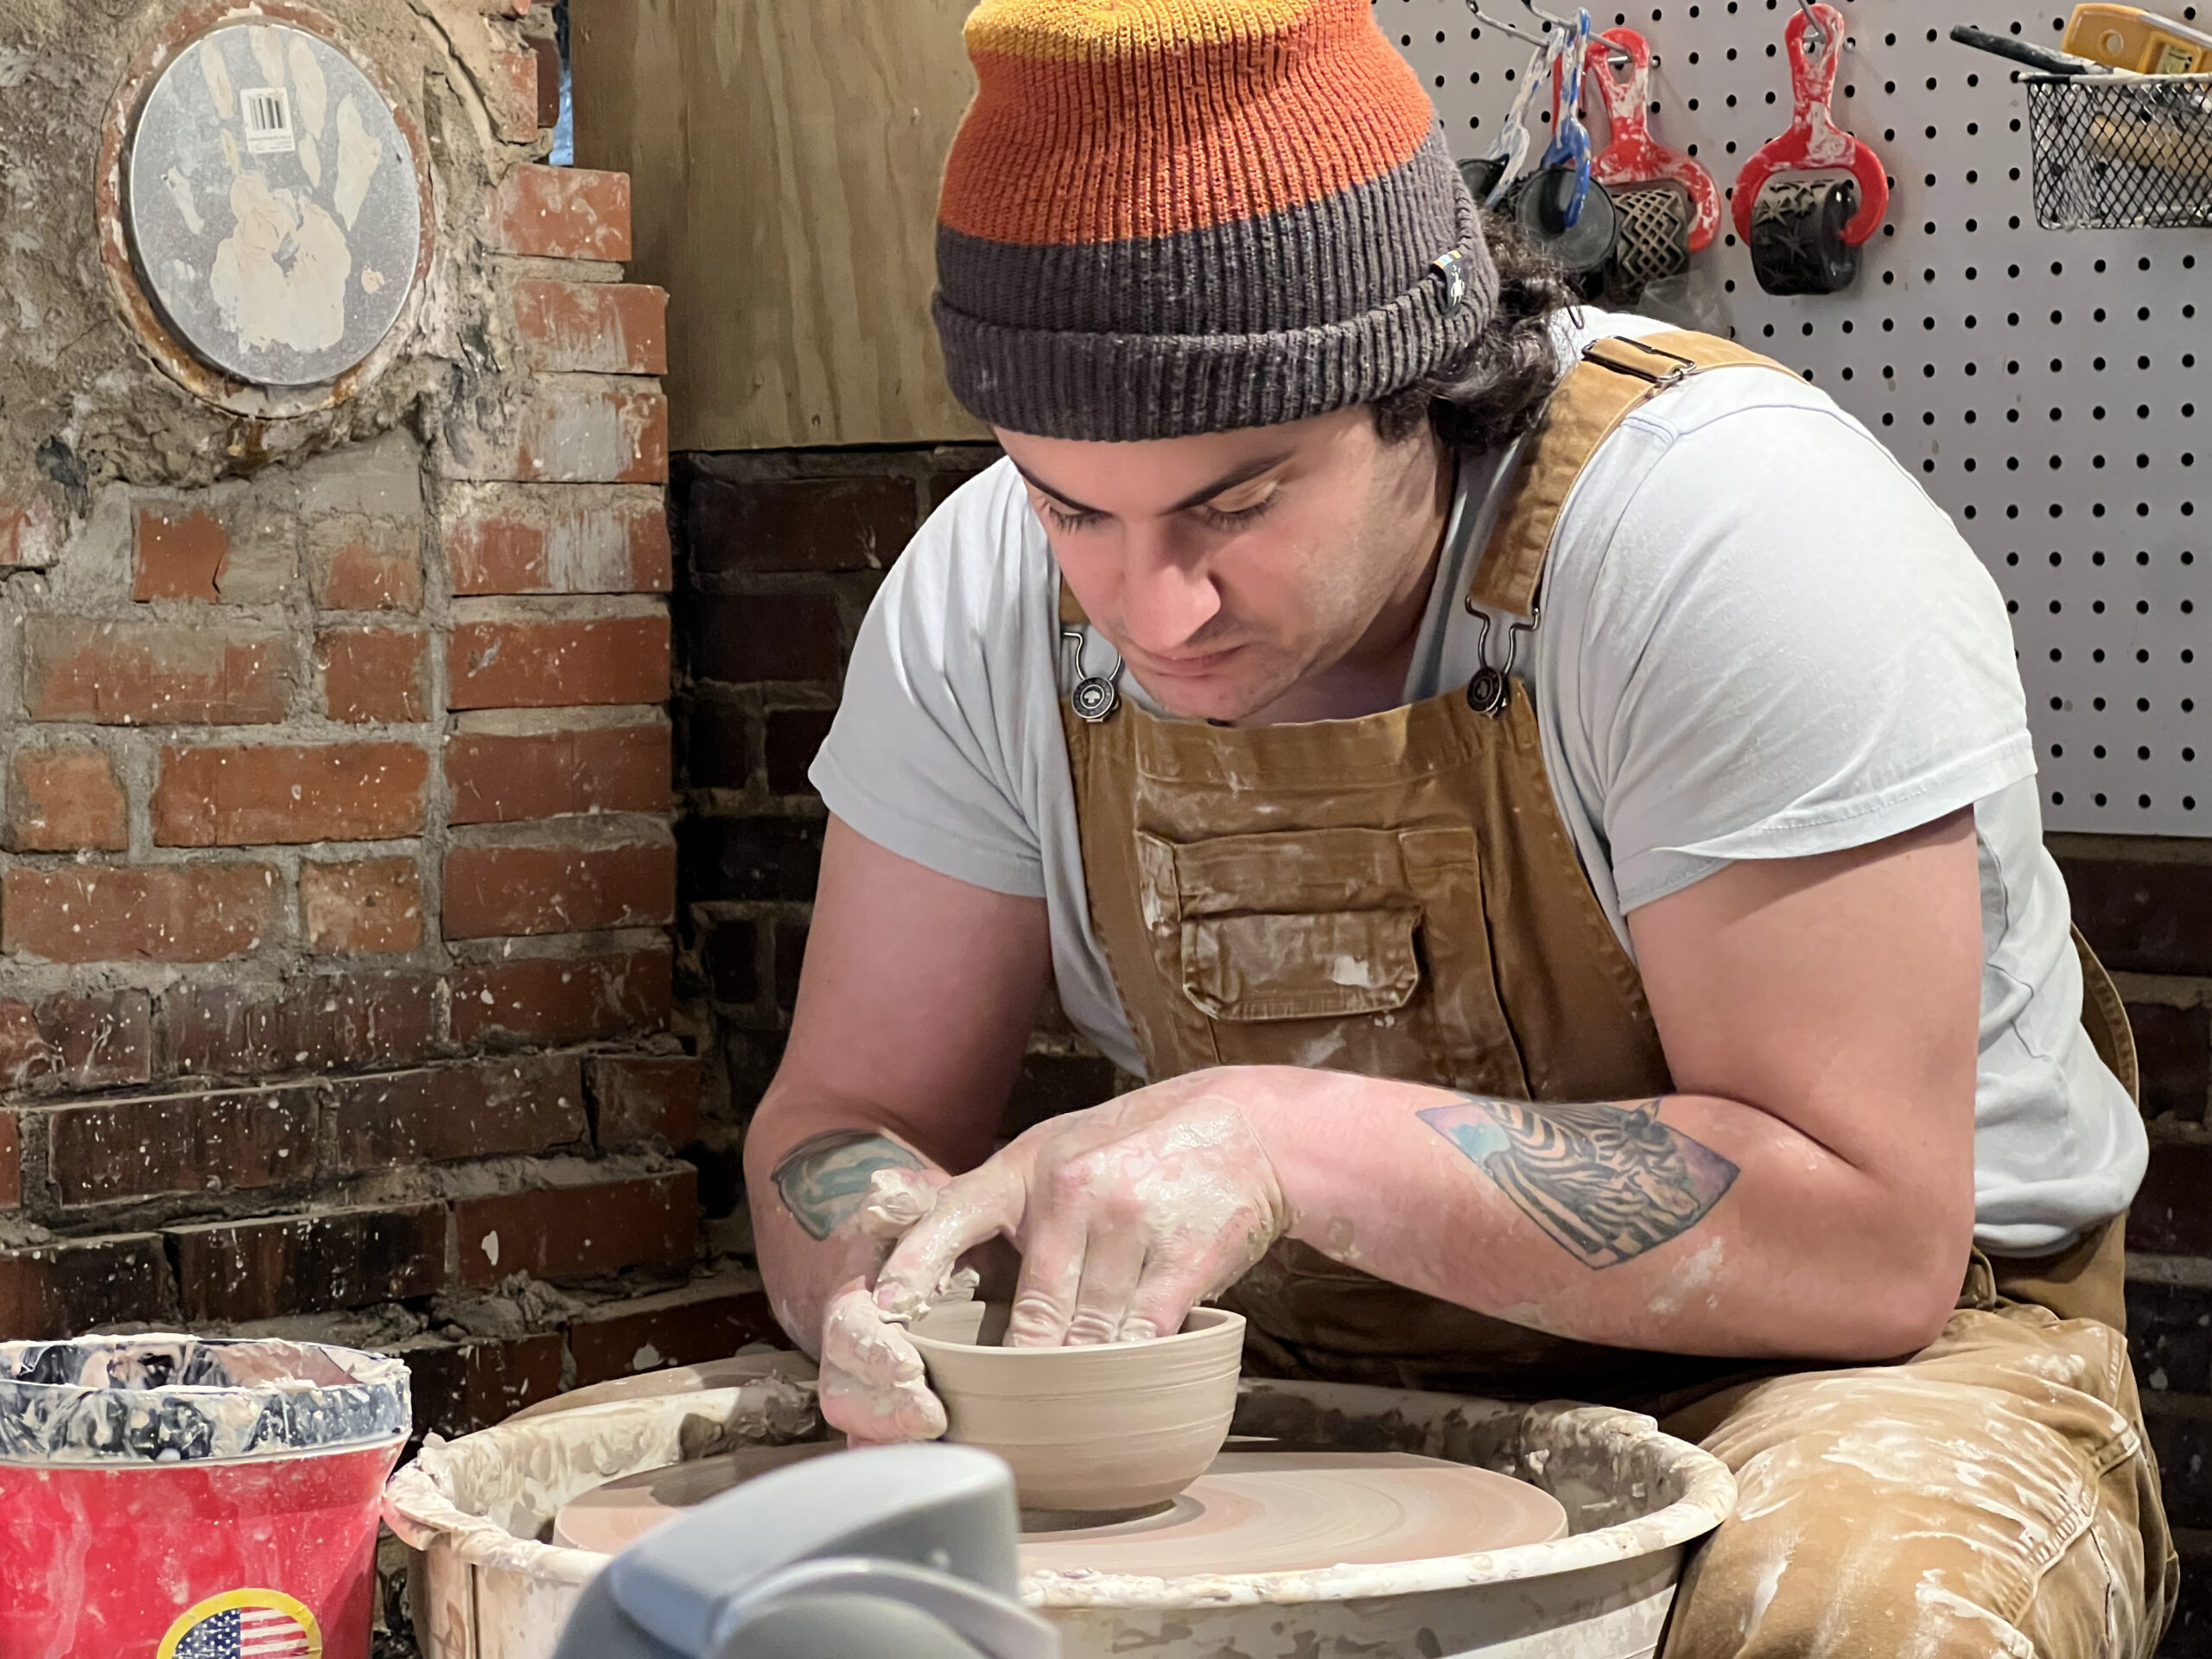 an artist wearing a pale tee shirt, paint spattered overalls, and an orange beanie is working over a potter's wheel. 